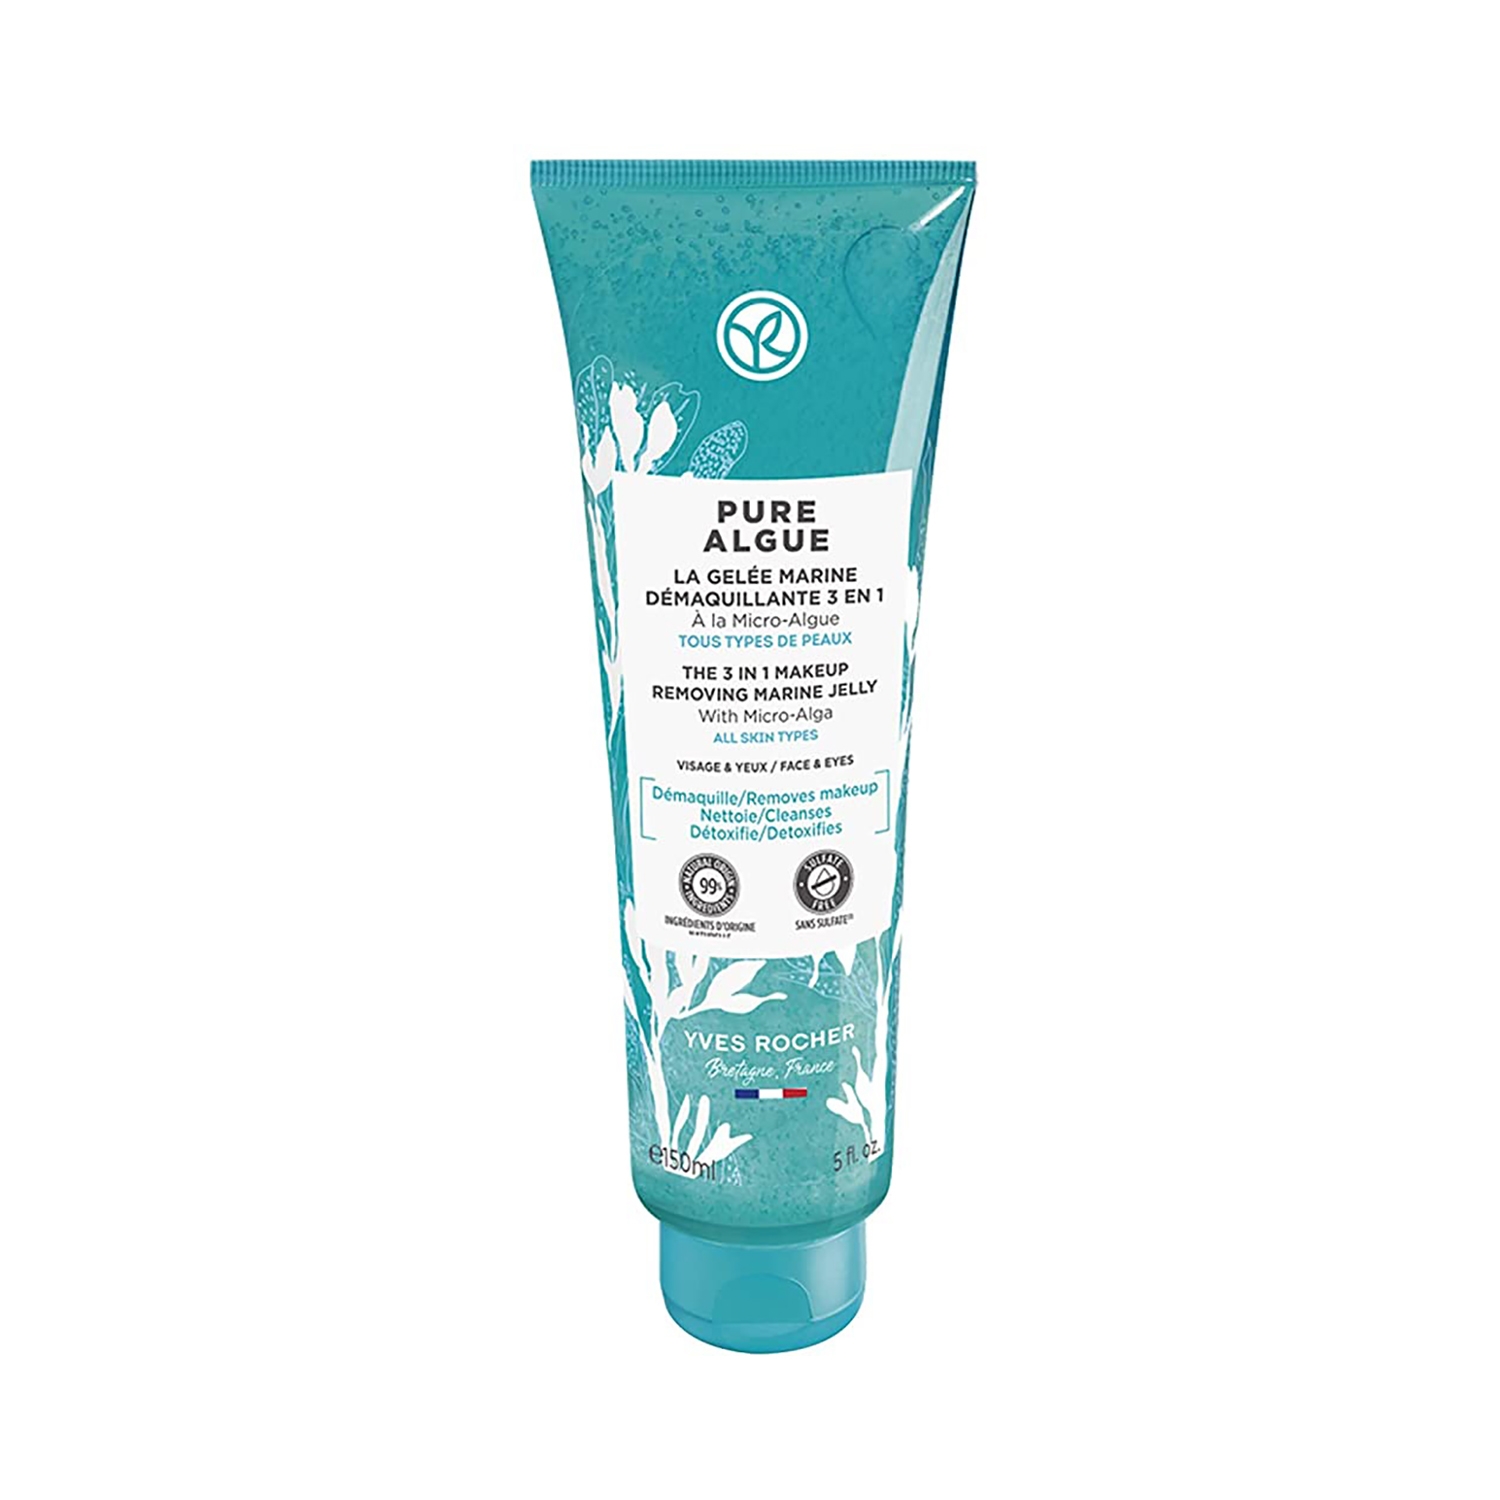 Yves Rocher | Yves Rocher Pure Algue The 3 In 1 Makeup Removing Marine Jelly (150ml)